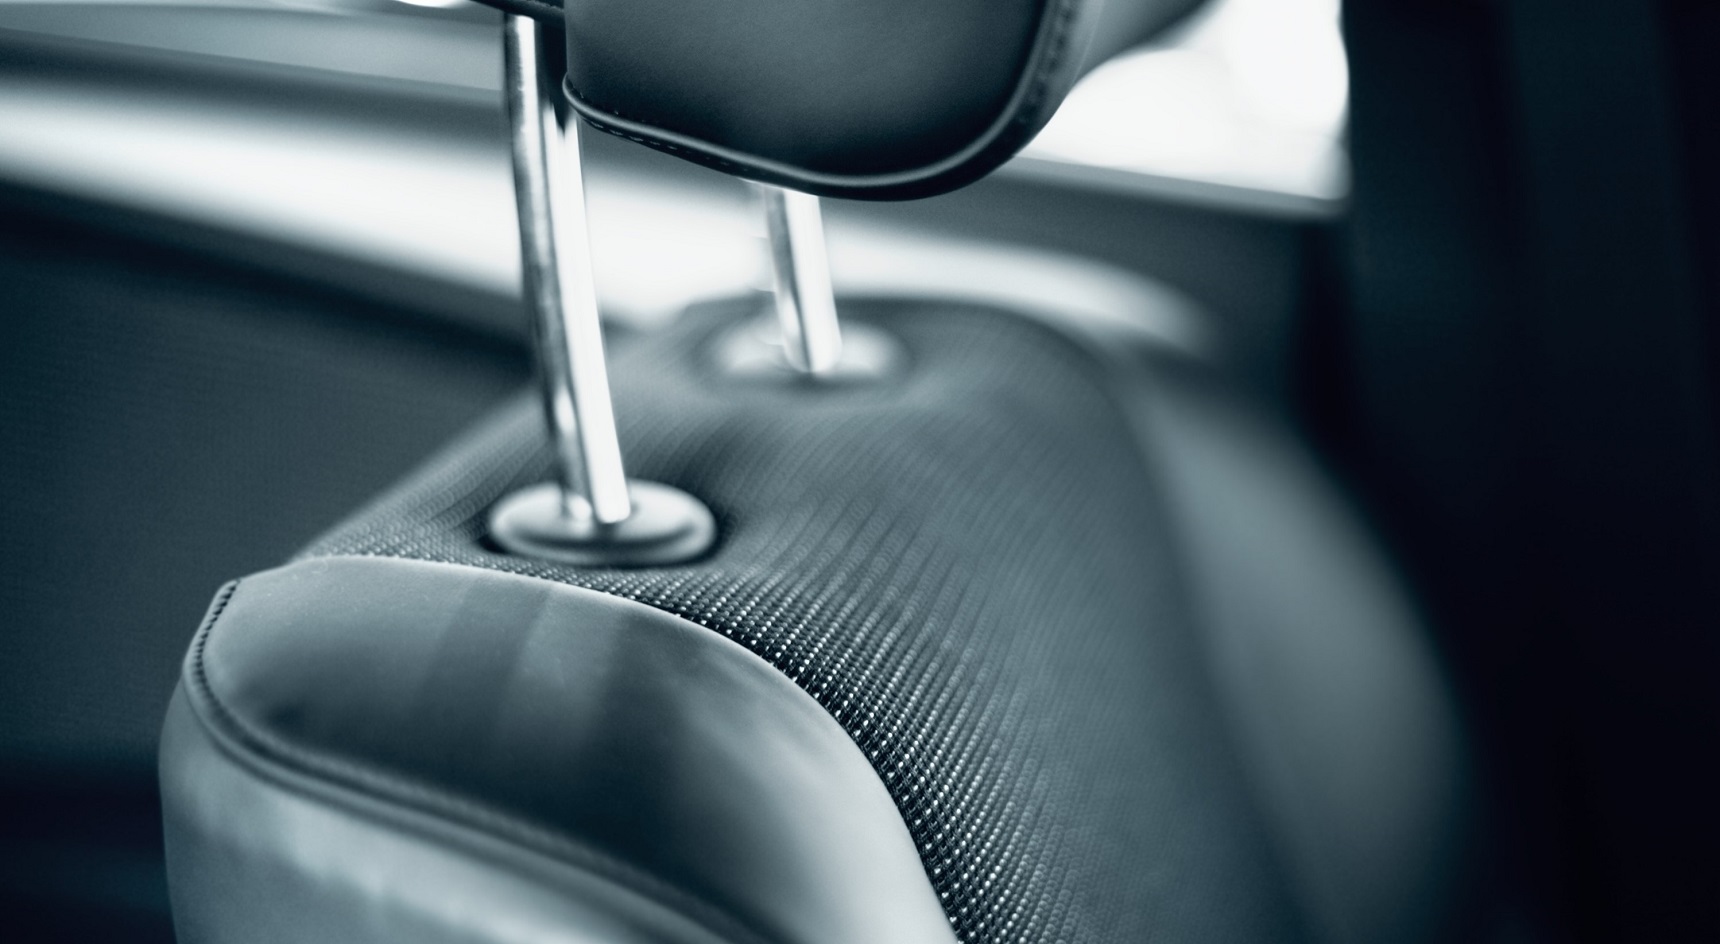 Ensure your headrests are set up properly. Image: Getty